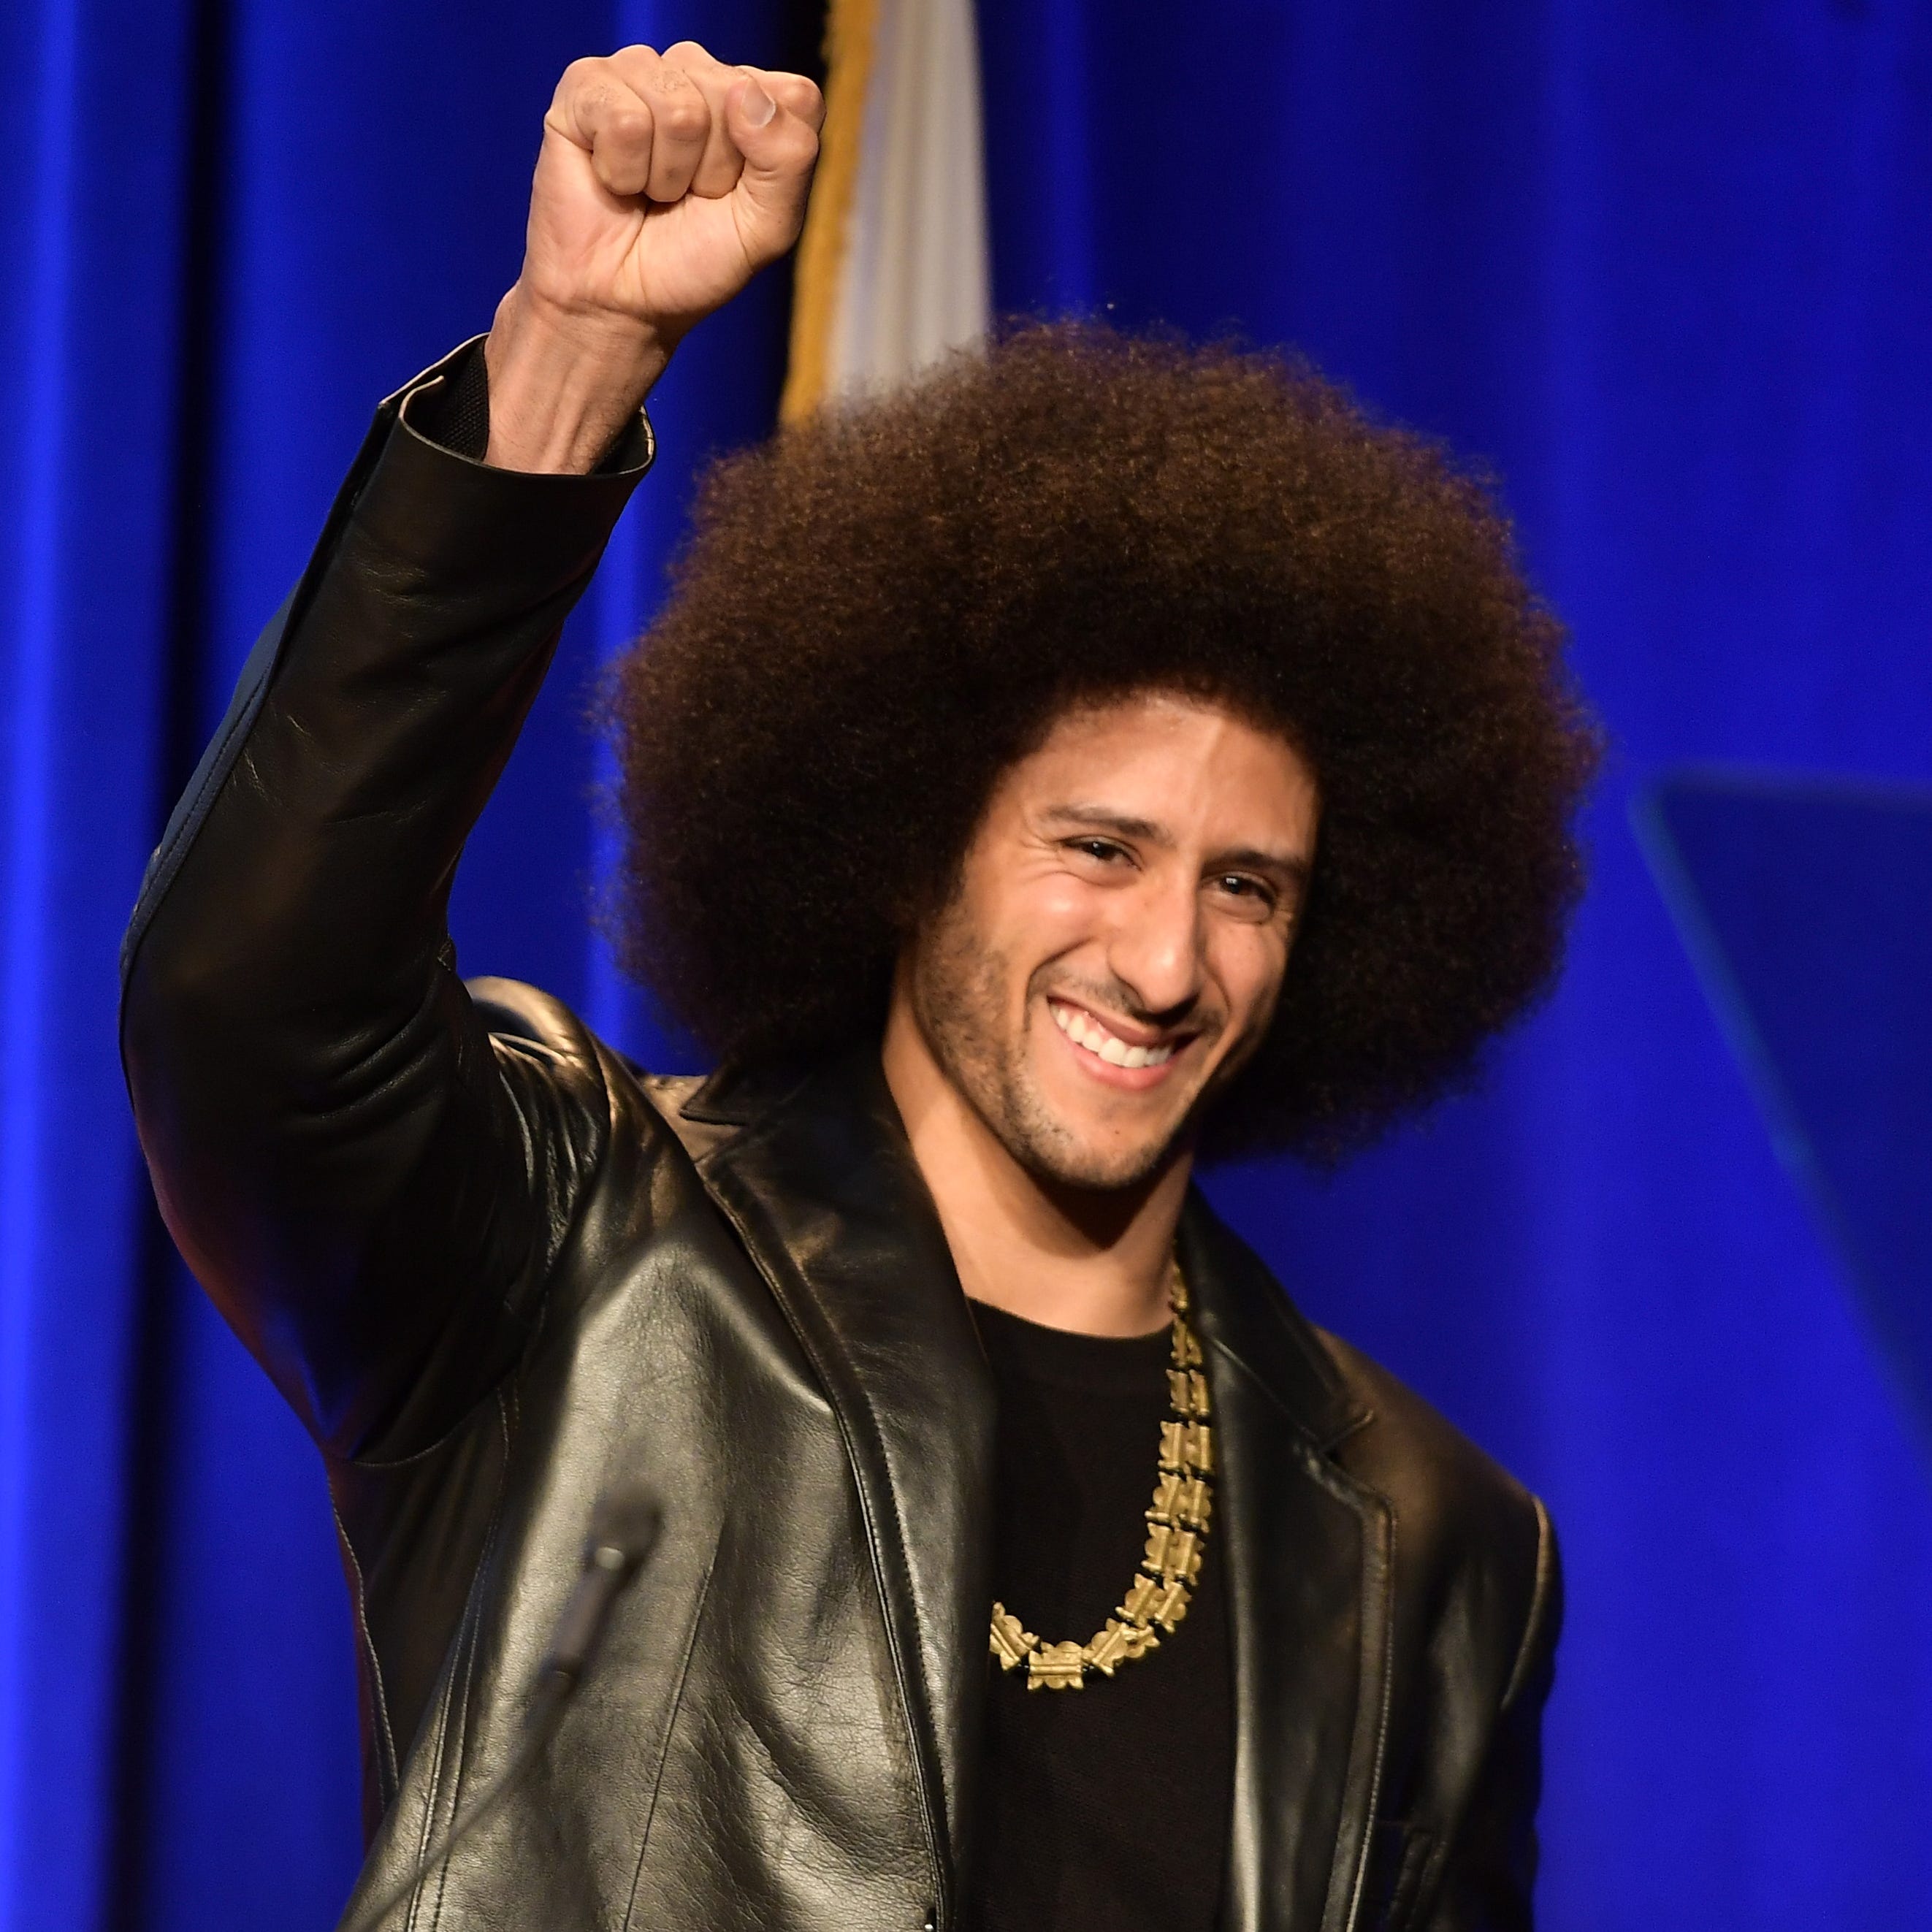 Colin Kaepernick last played in an NFL game during the 2016 season.